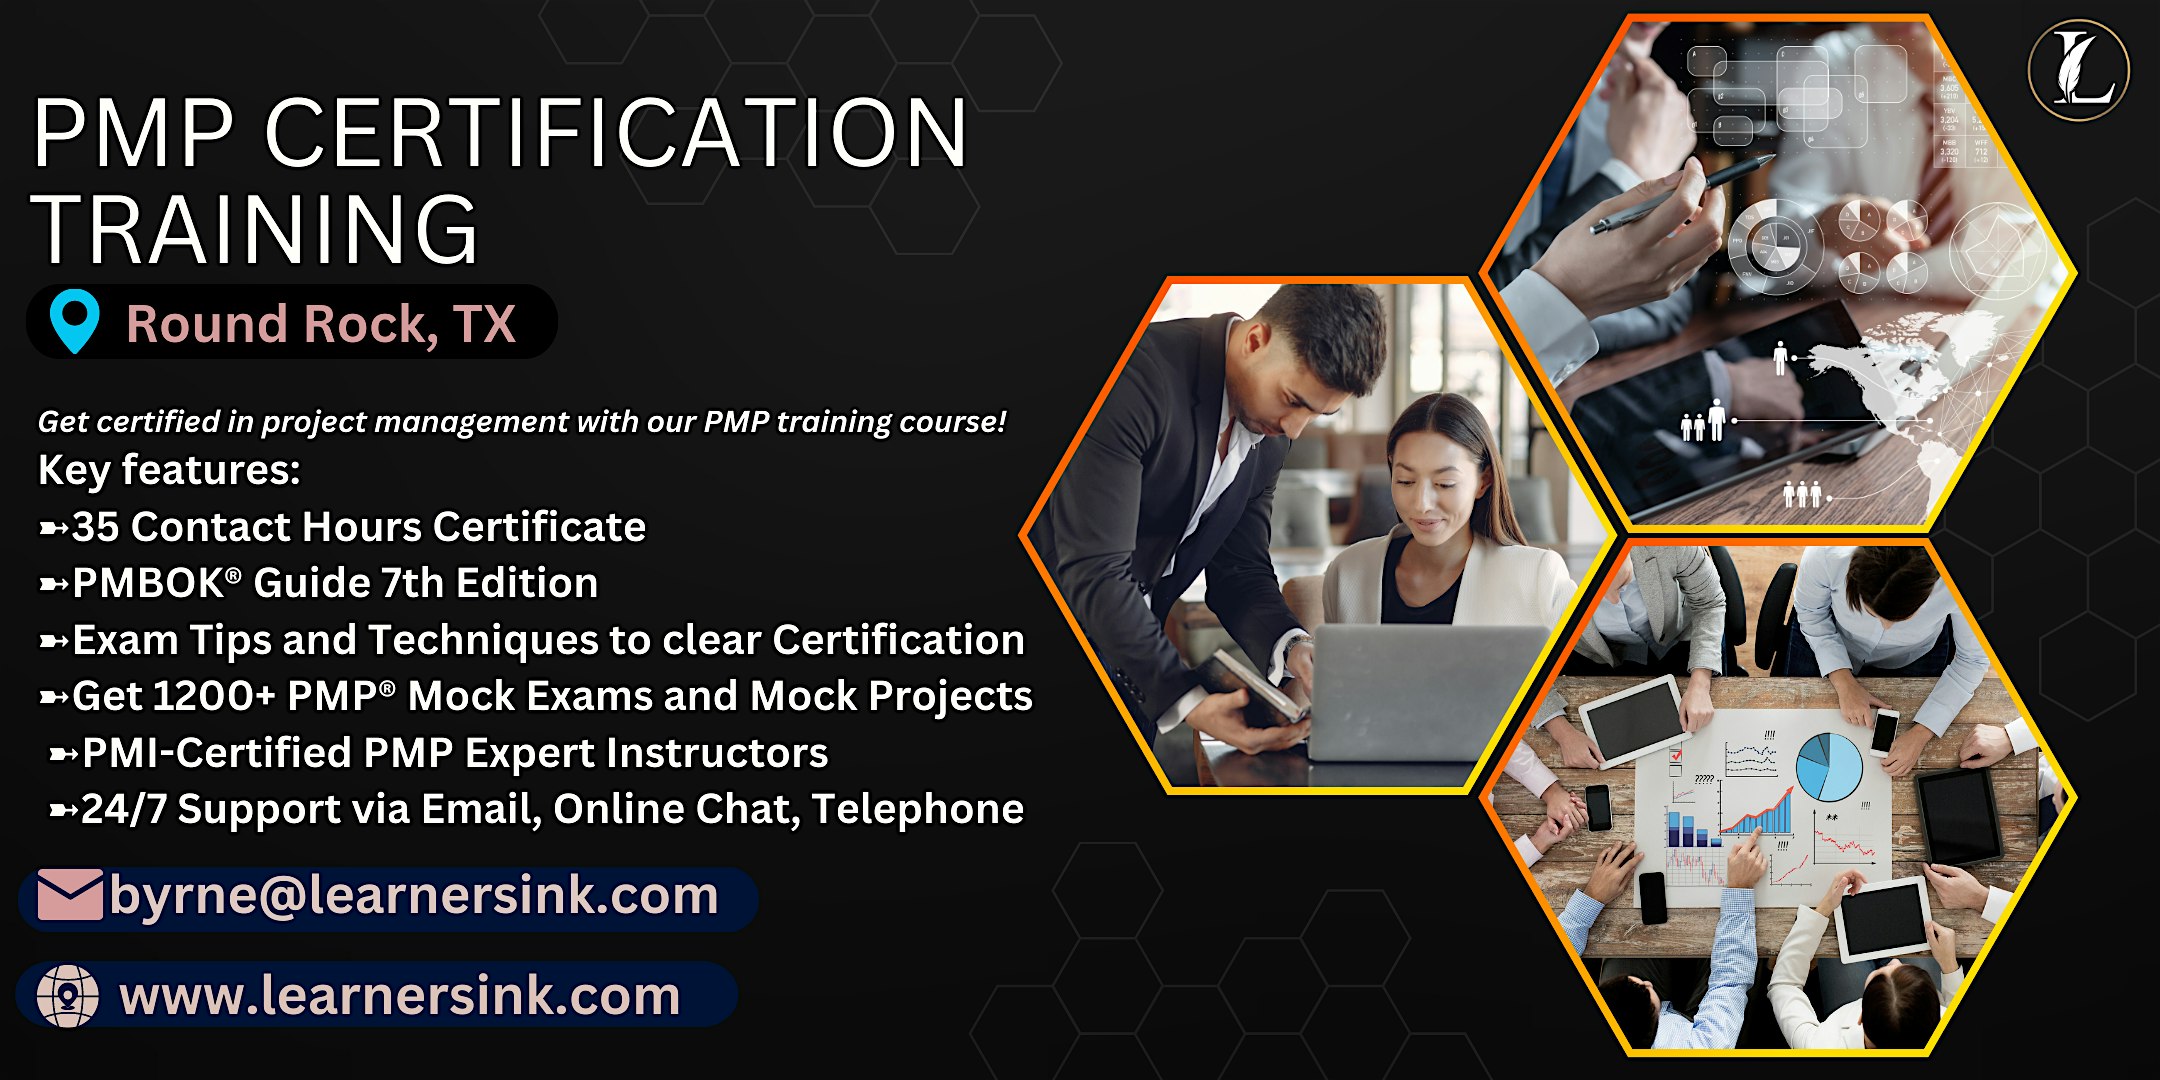 Increase your Profession with PMP Certification in Round Rock, TX